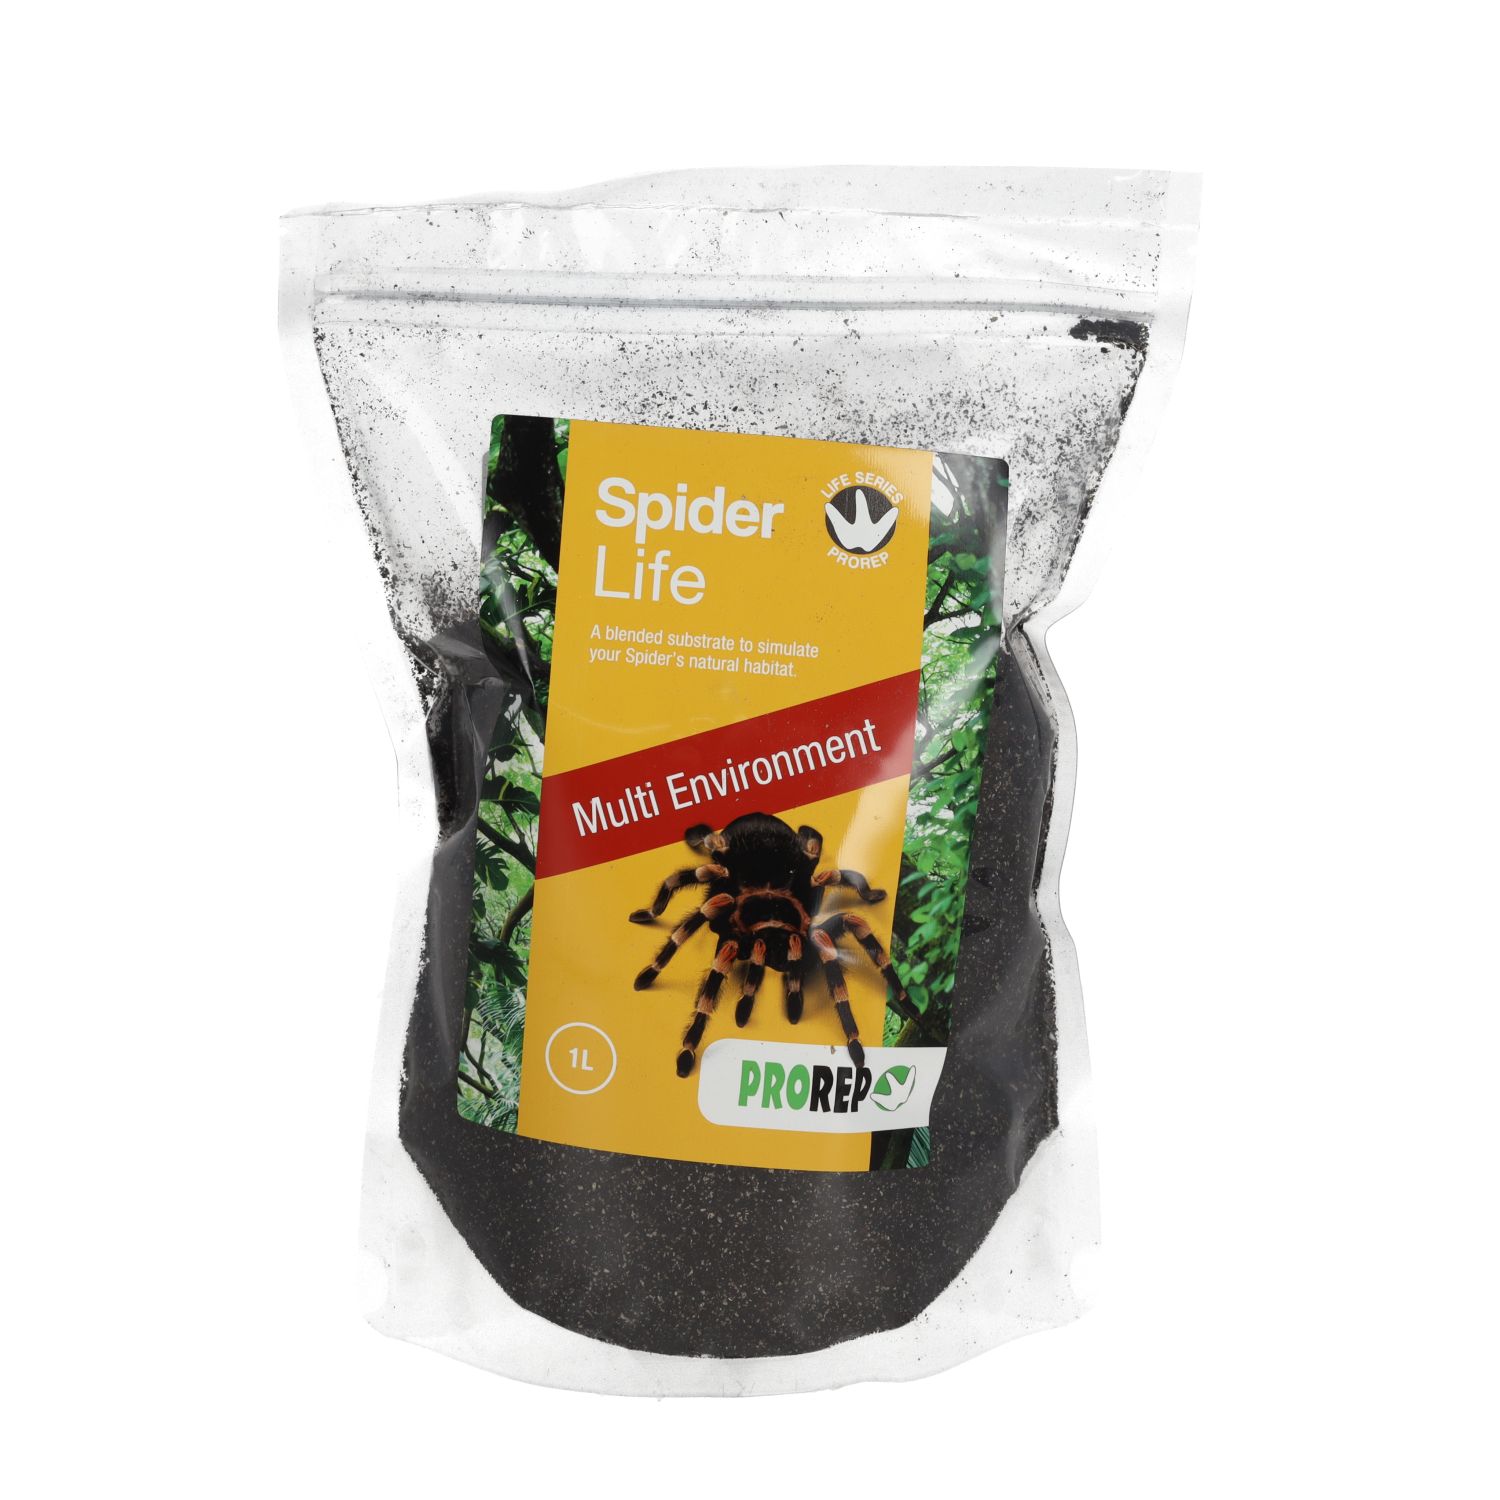 PR Spider Life Substrate, 1 Litre